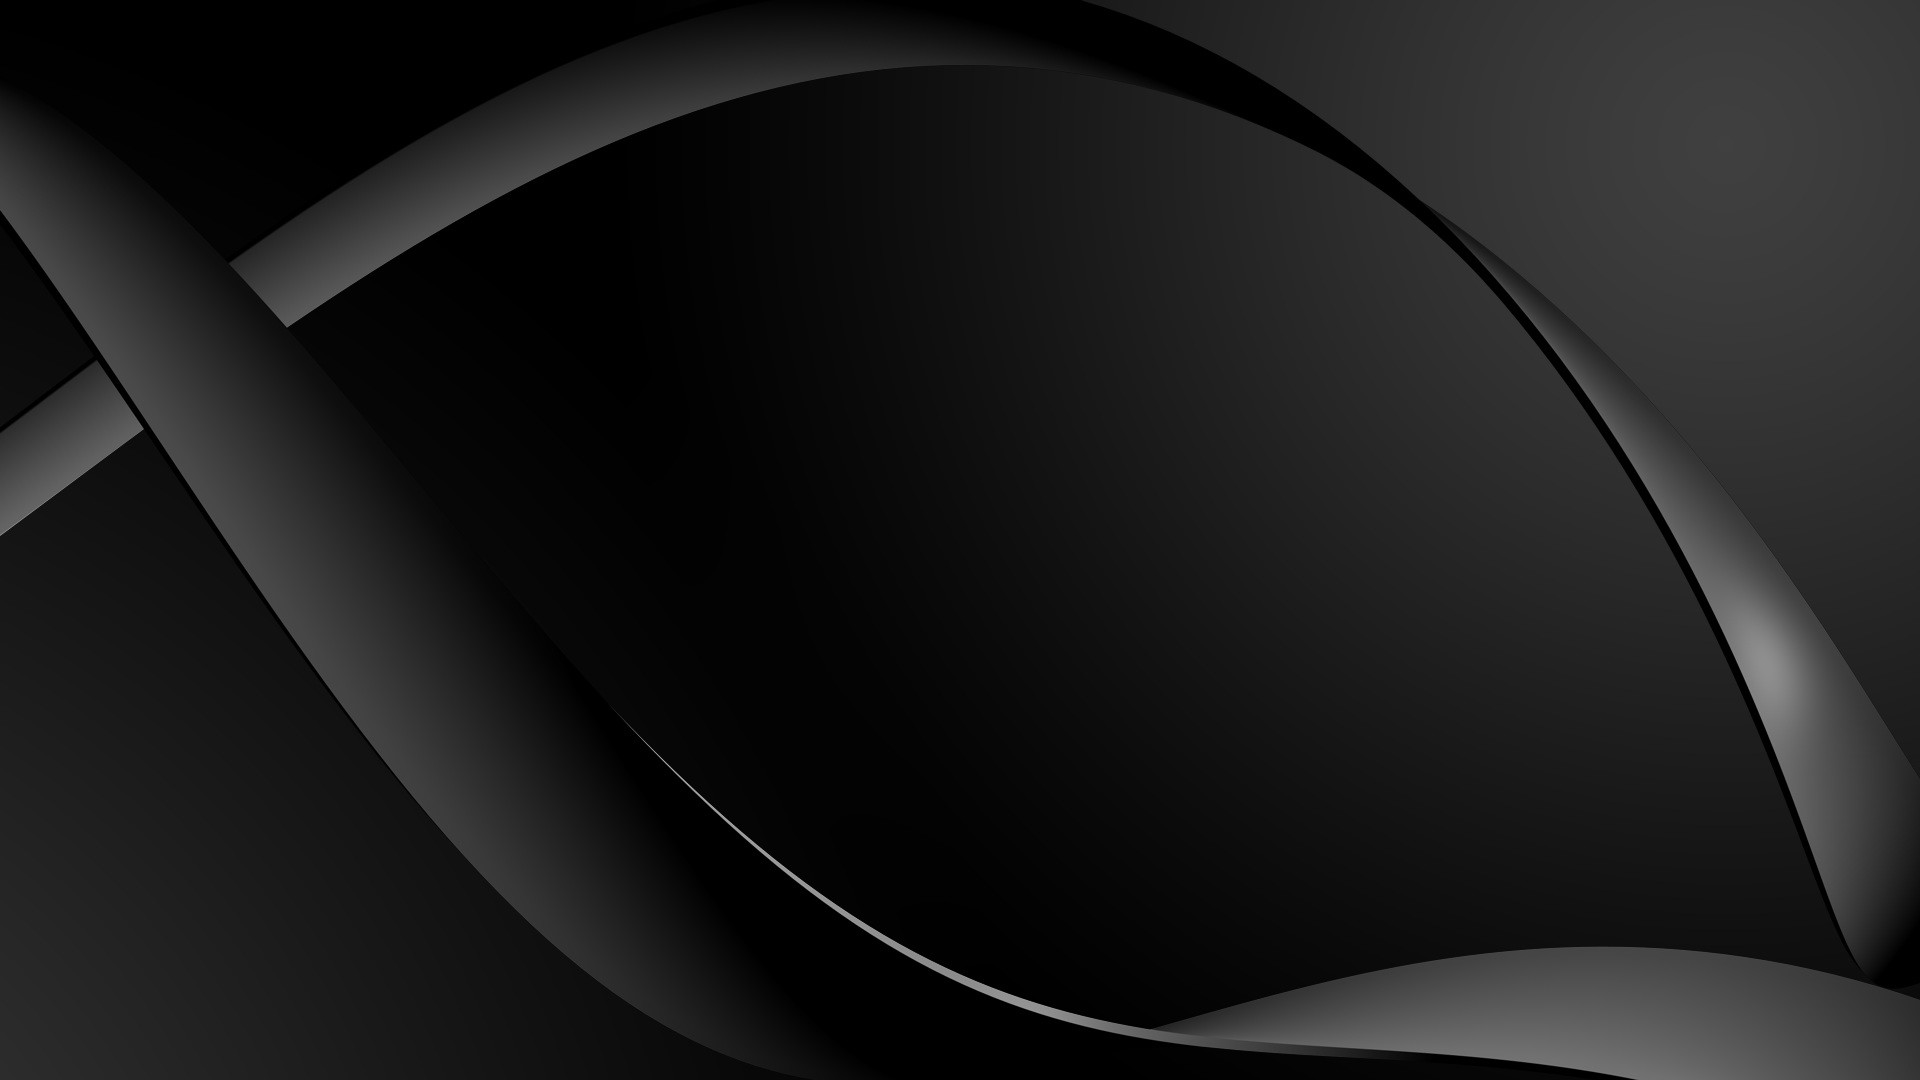 Black Abstract Wallpaper 2835 Hd Wallpapers in Abstract – Imagesci.com